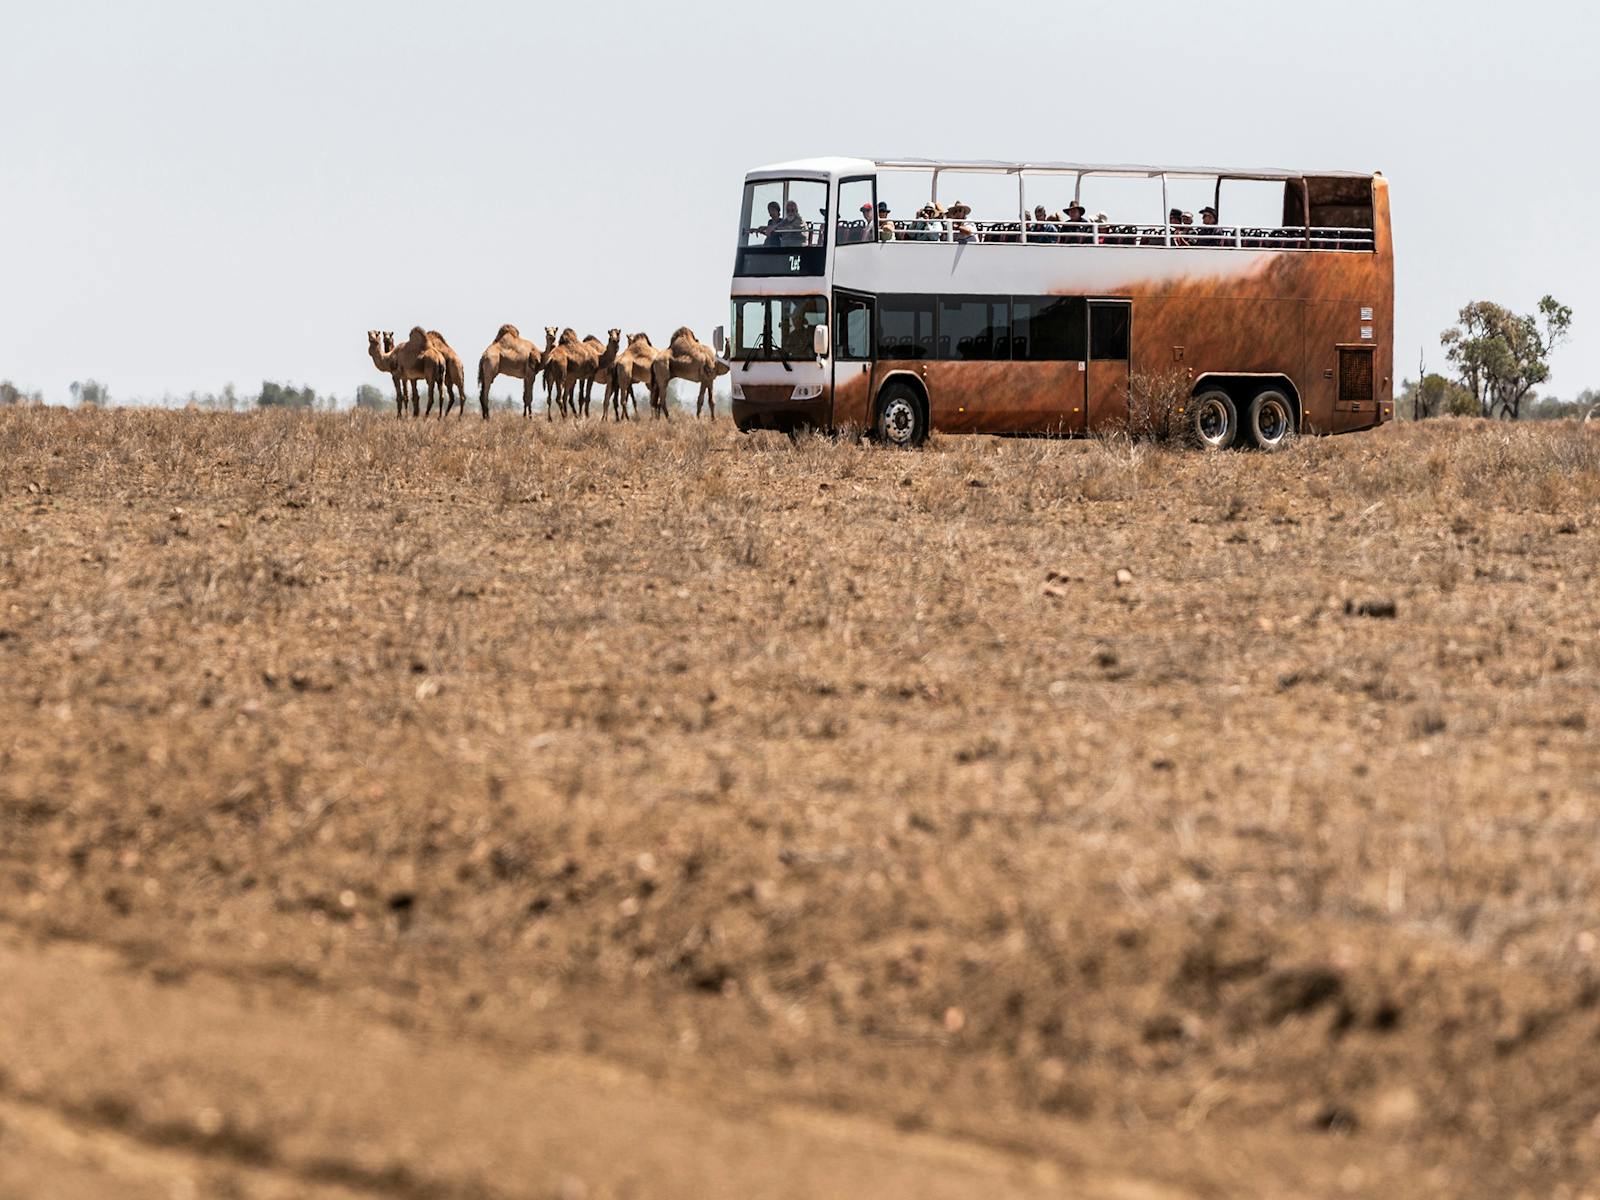 Camels and bus in Nogo Station field